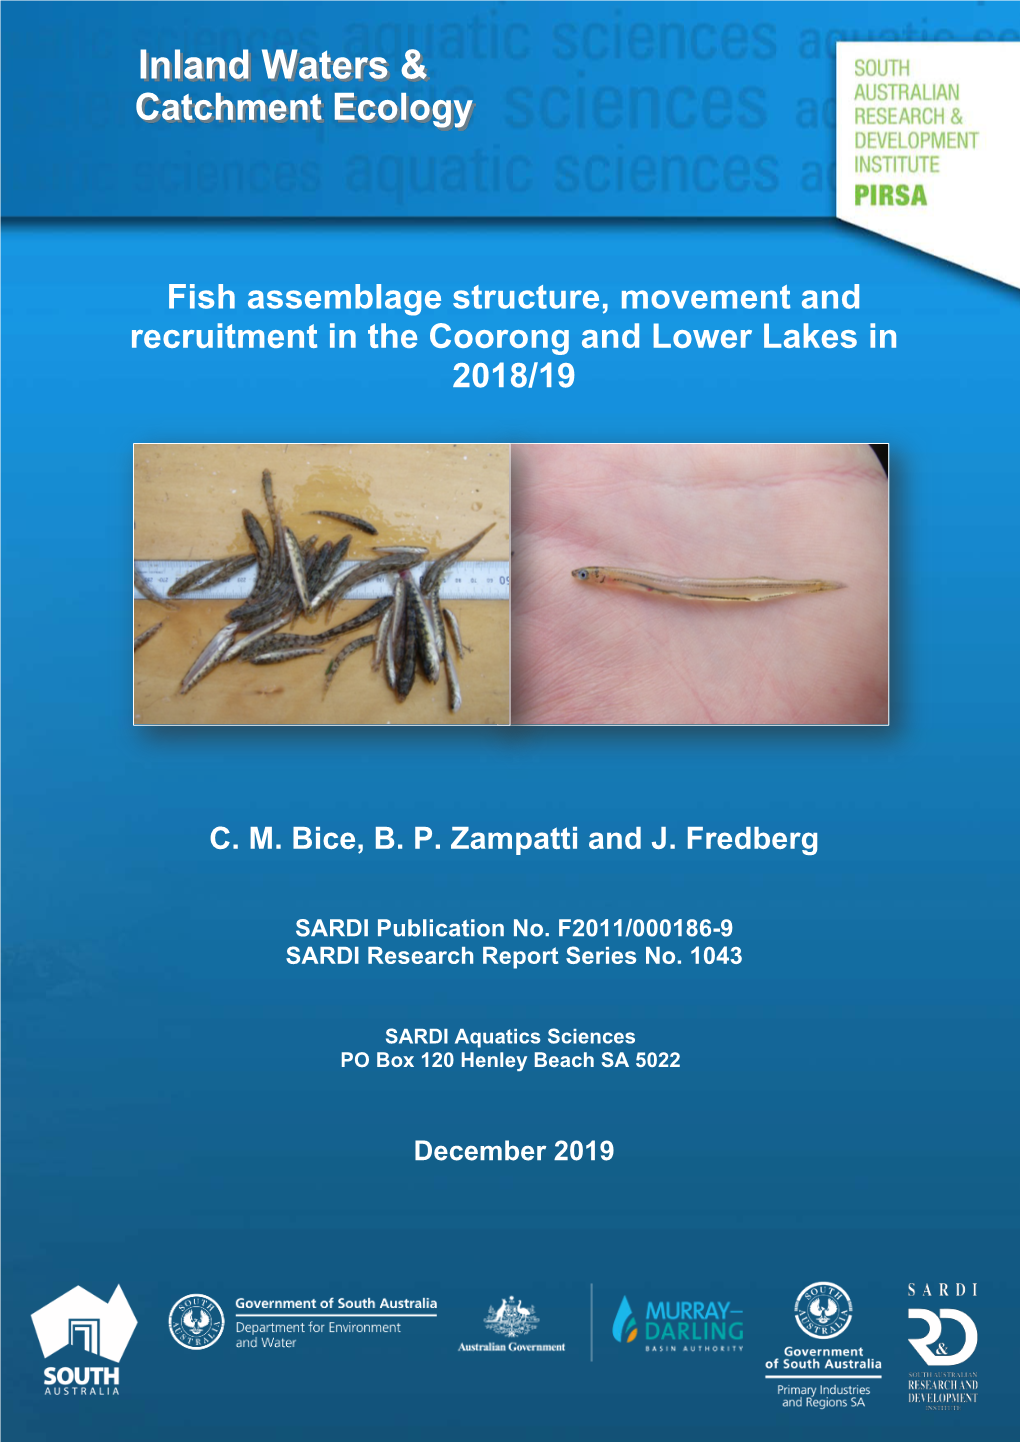 Fish Assemblage Structure, Movement and Recruitment in the Coorong and Lower Lakes in 2018/19